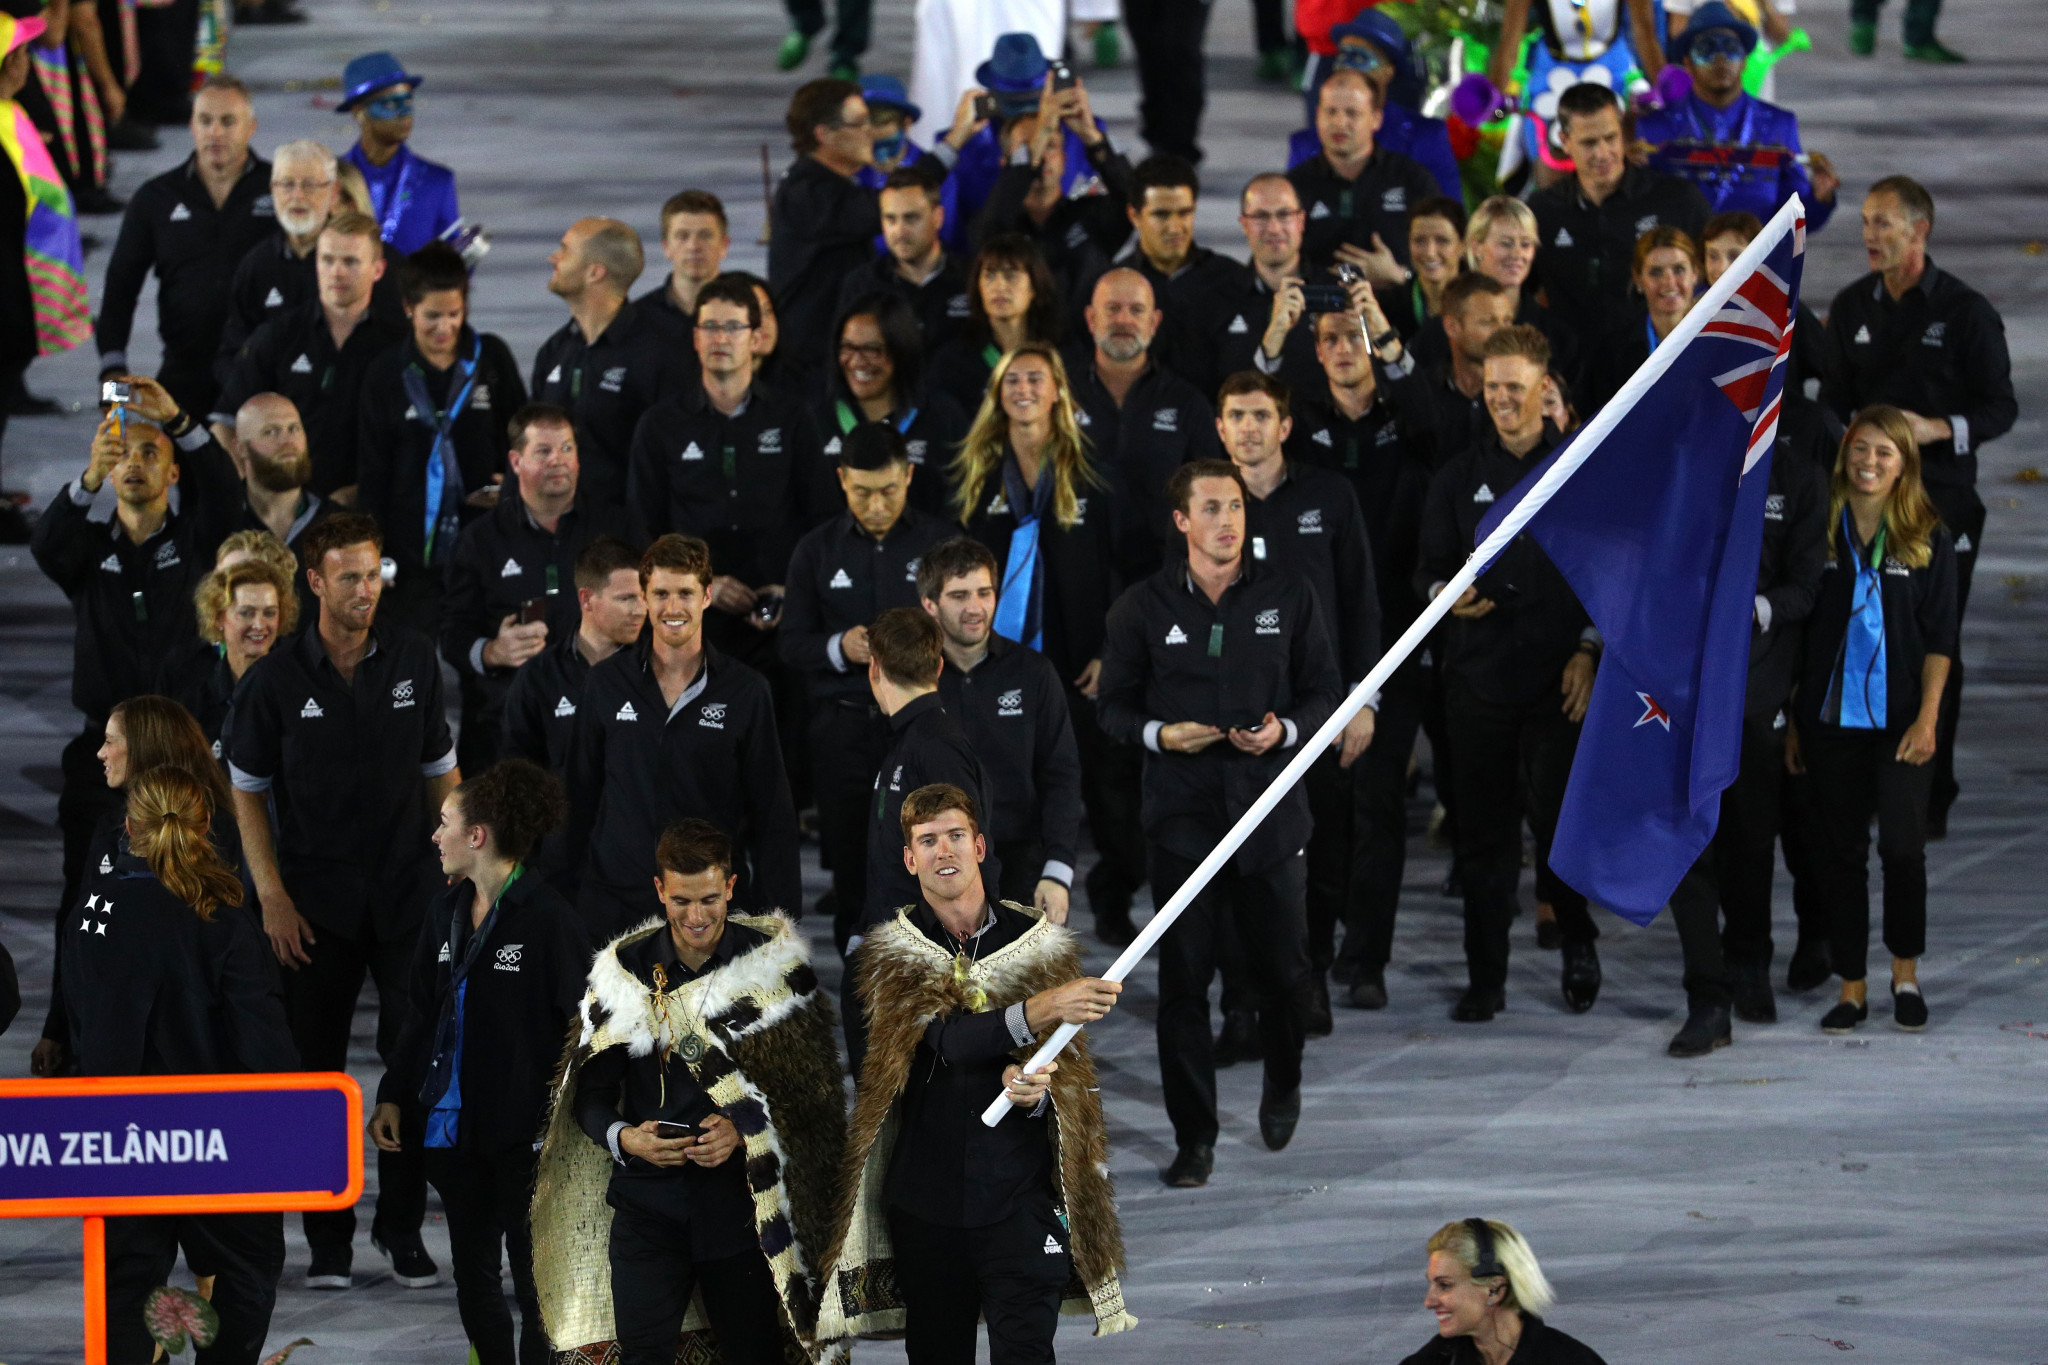 New Zealand sent a team of 199 athletes to the Rio 2016 Olympics, but is set to send between 200 and 220 to the rearranged Tokyo 2020 Games ©Getty Images